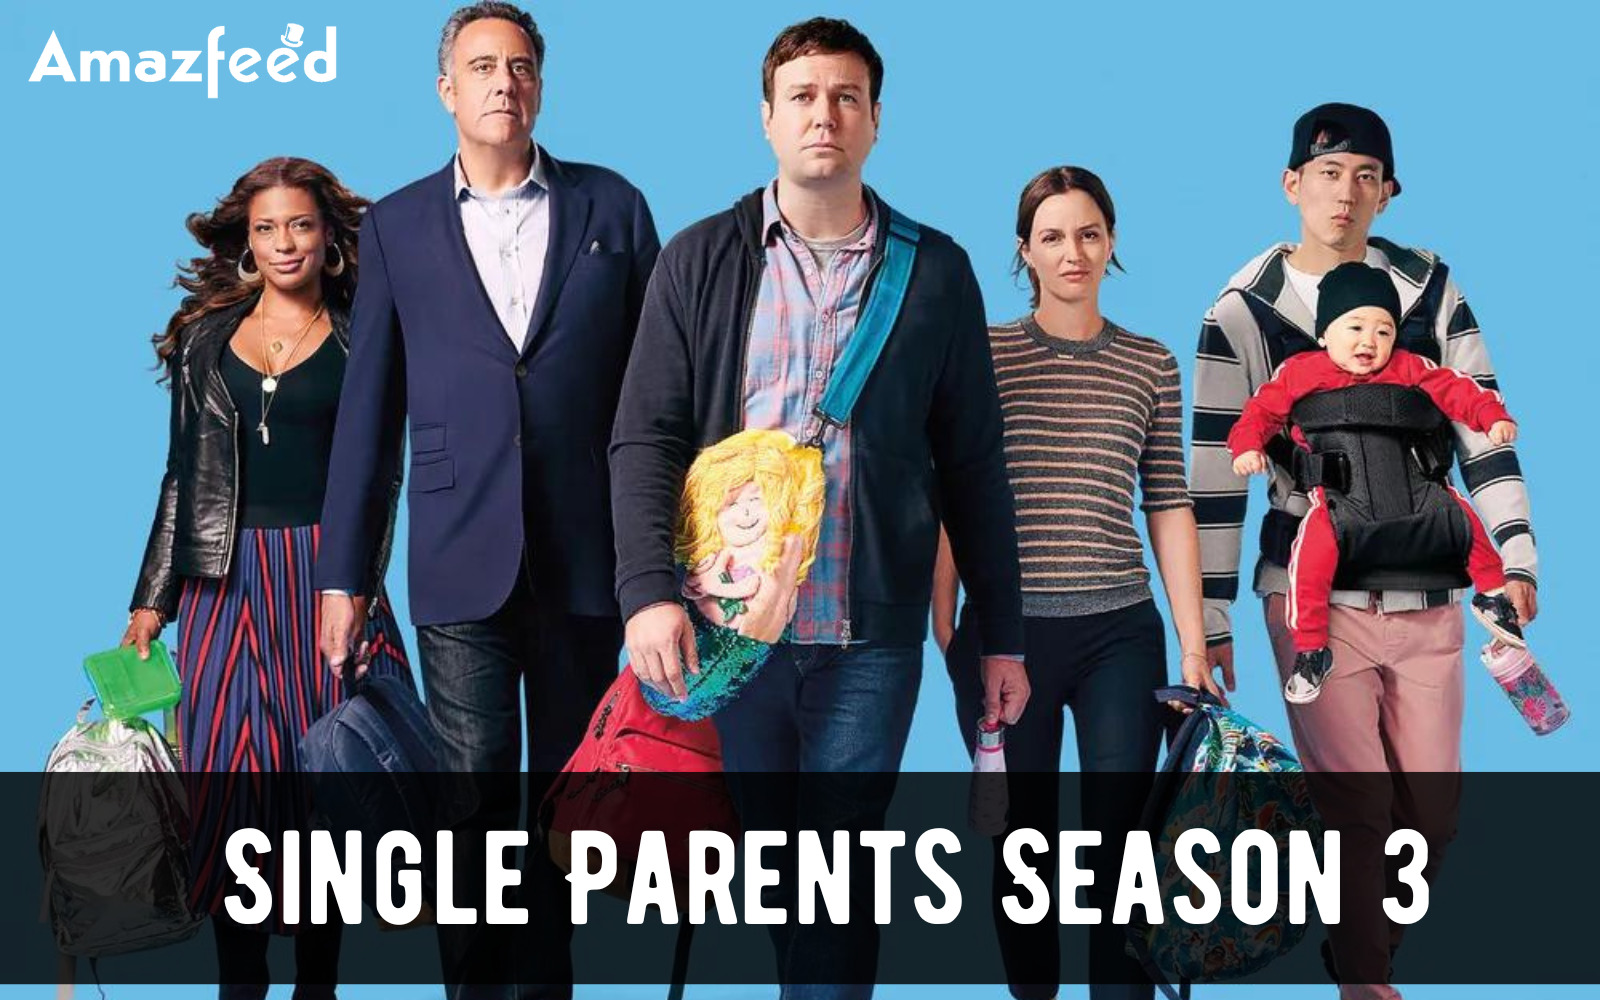 Who Will Be Part Of Single Parents Season 3 (cast and character)